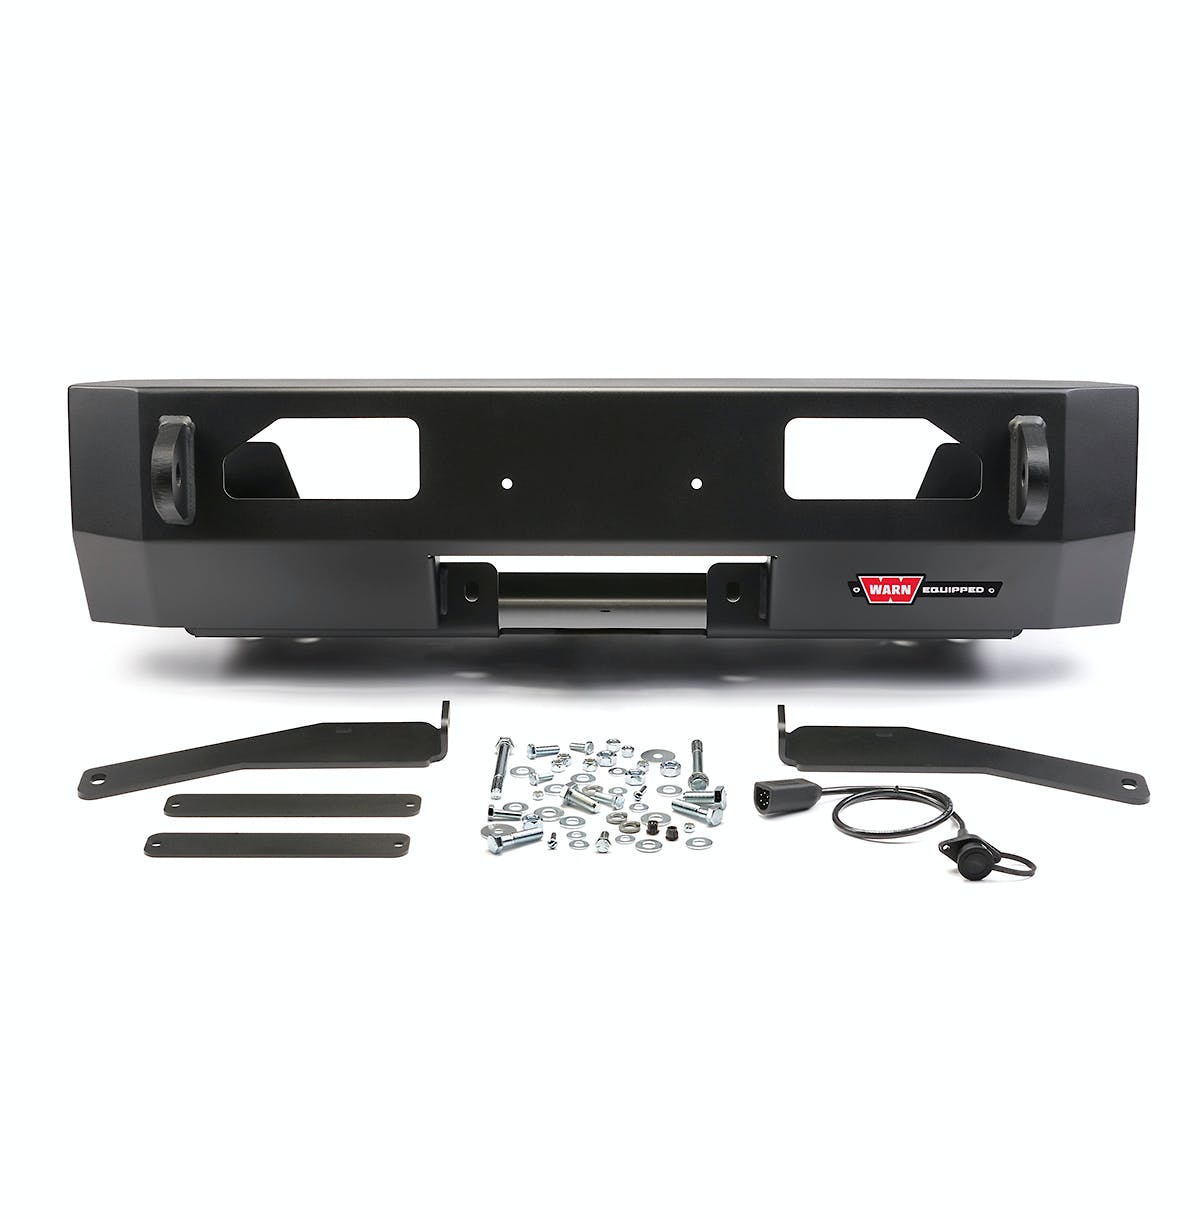 WARN 106254 Truck Mounting System